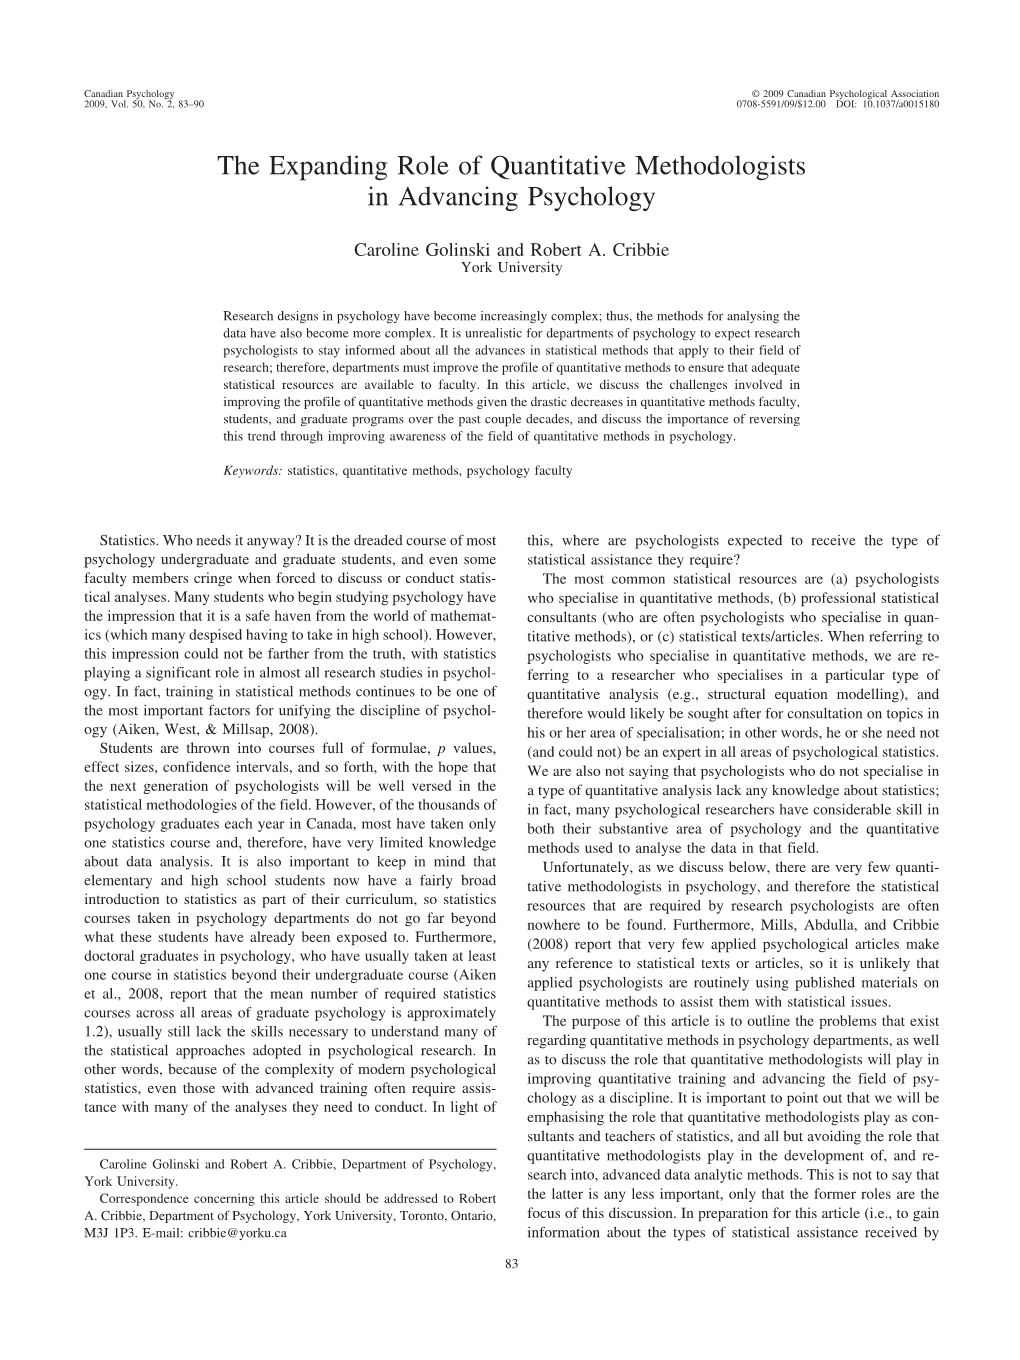 The Expanding Role of Quantitative Methodologists in Advancing Psychology